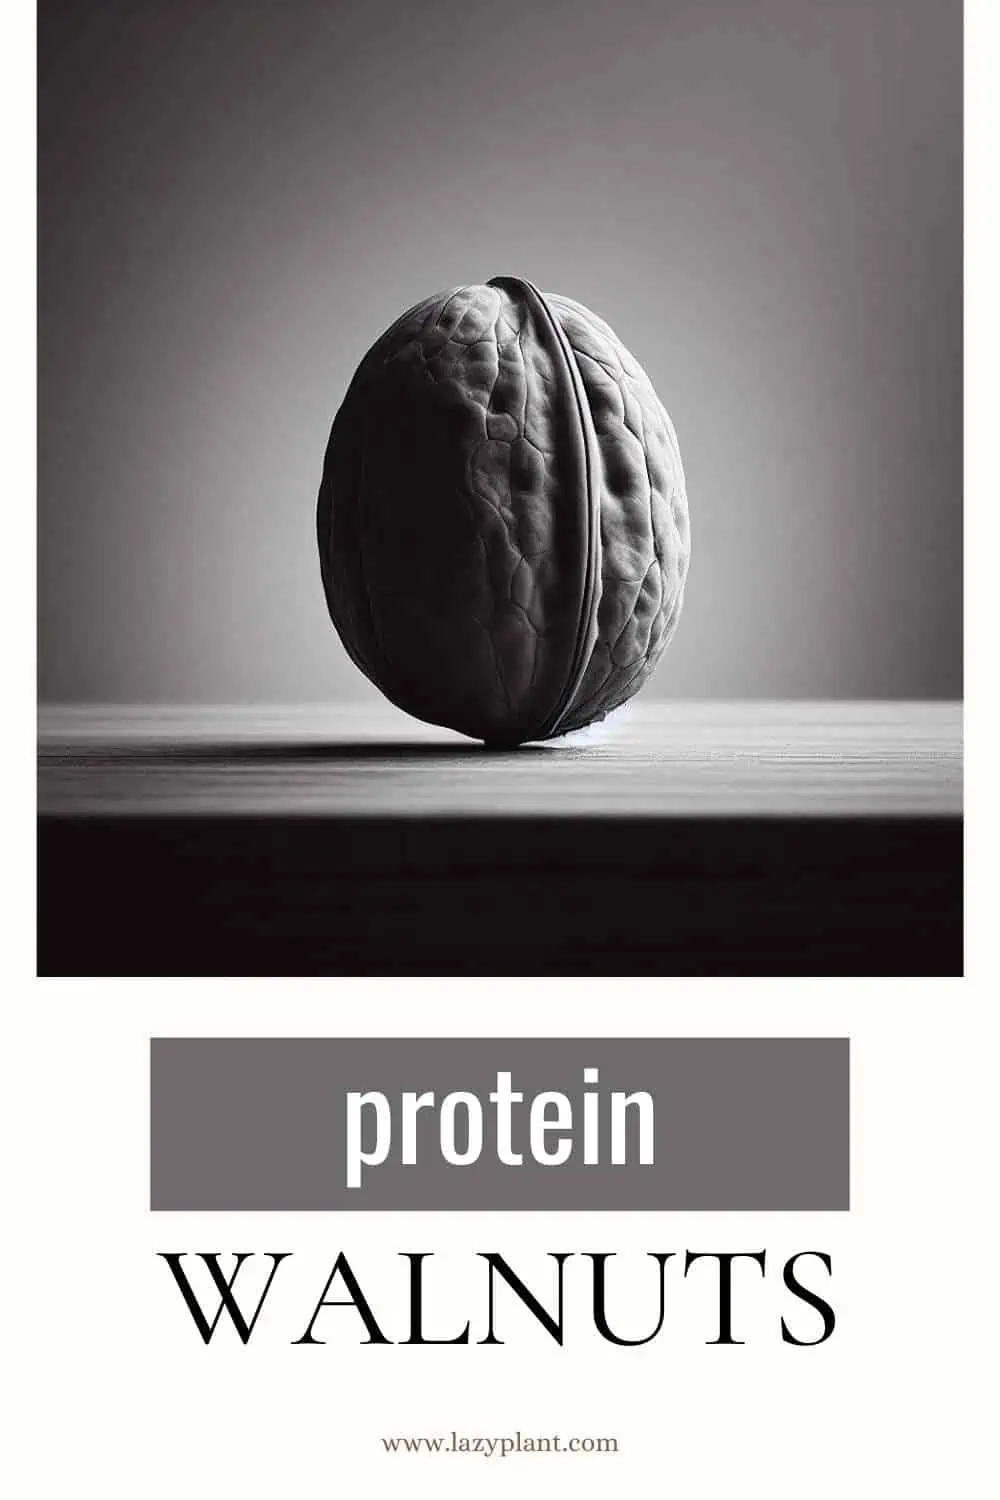 How much Protein is in Walnuts?